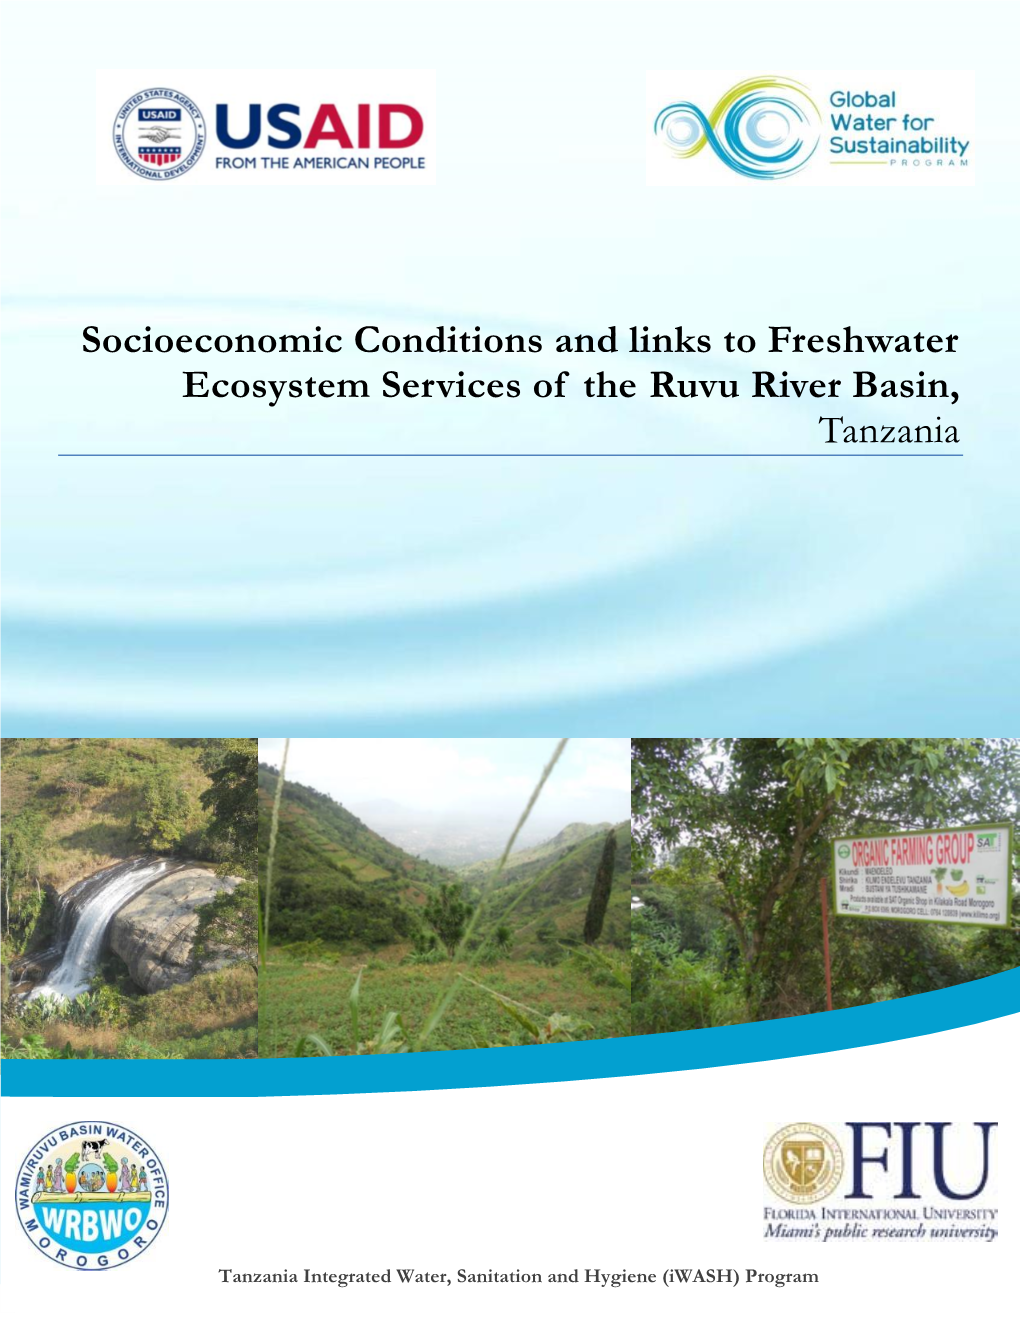 Socioeconomic Conditions and Links to Freshwater Ecosystem Services of the Ruvu River Basin, Tanzania